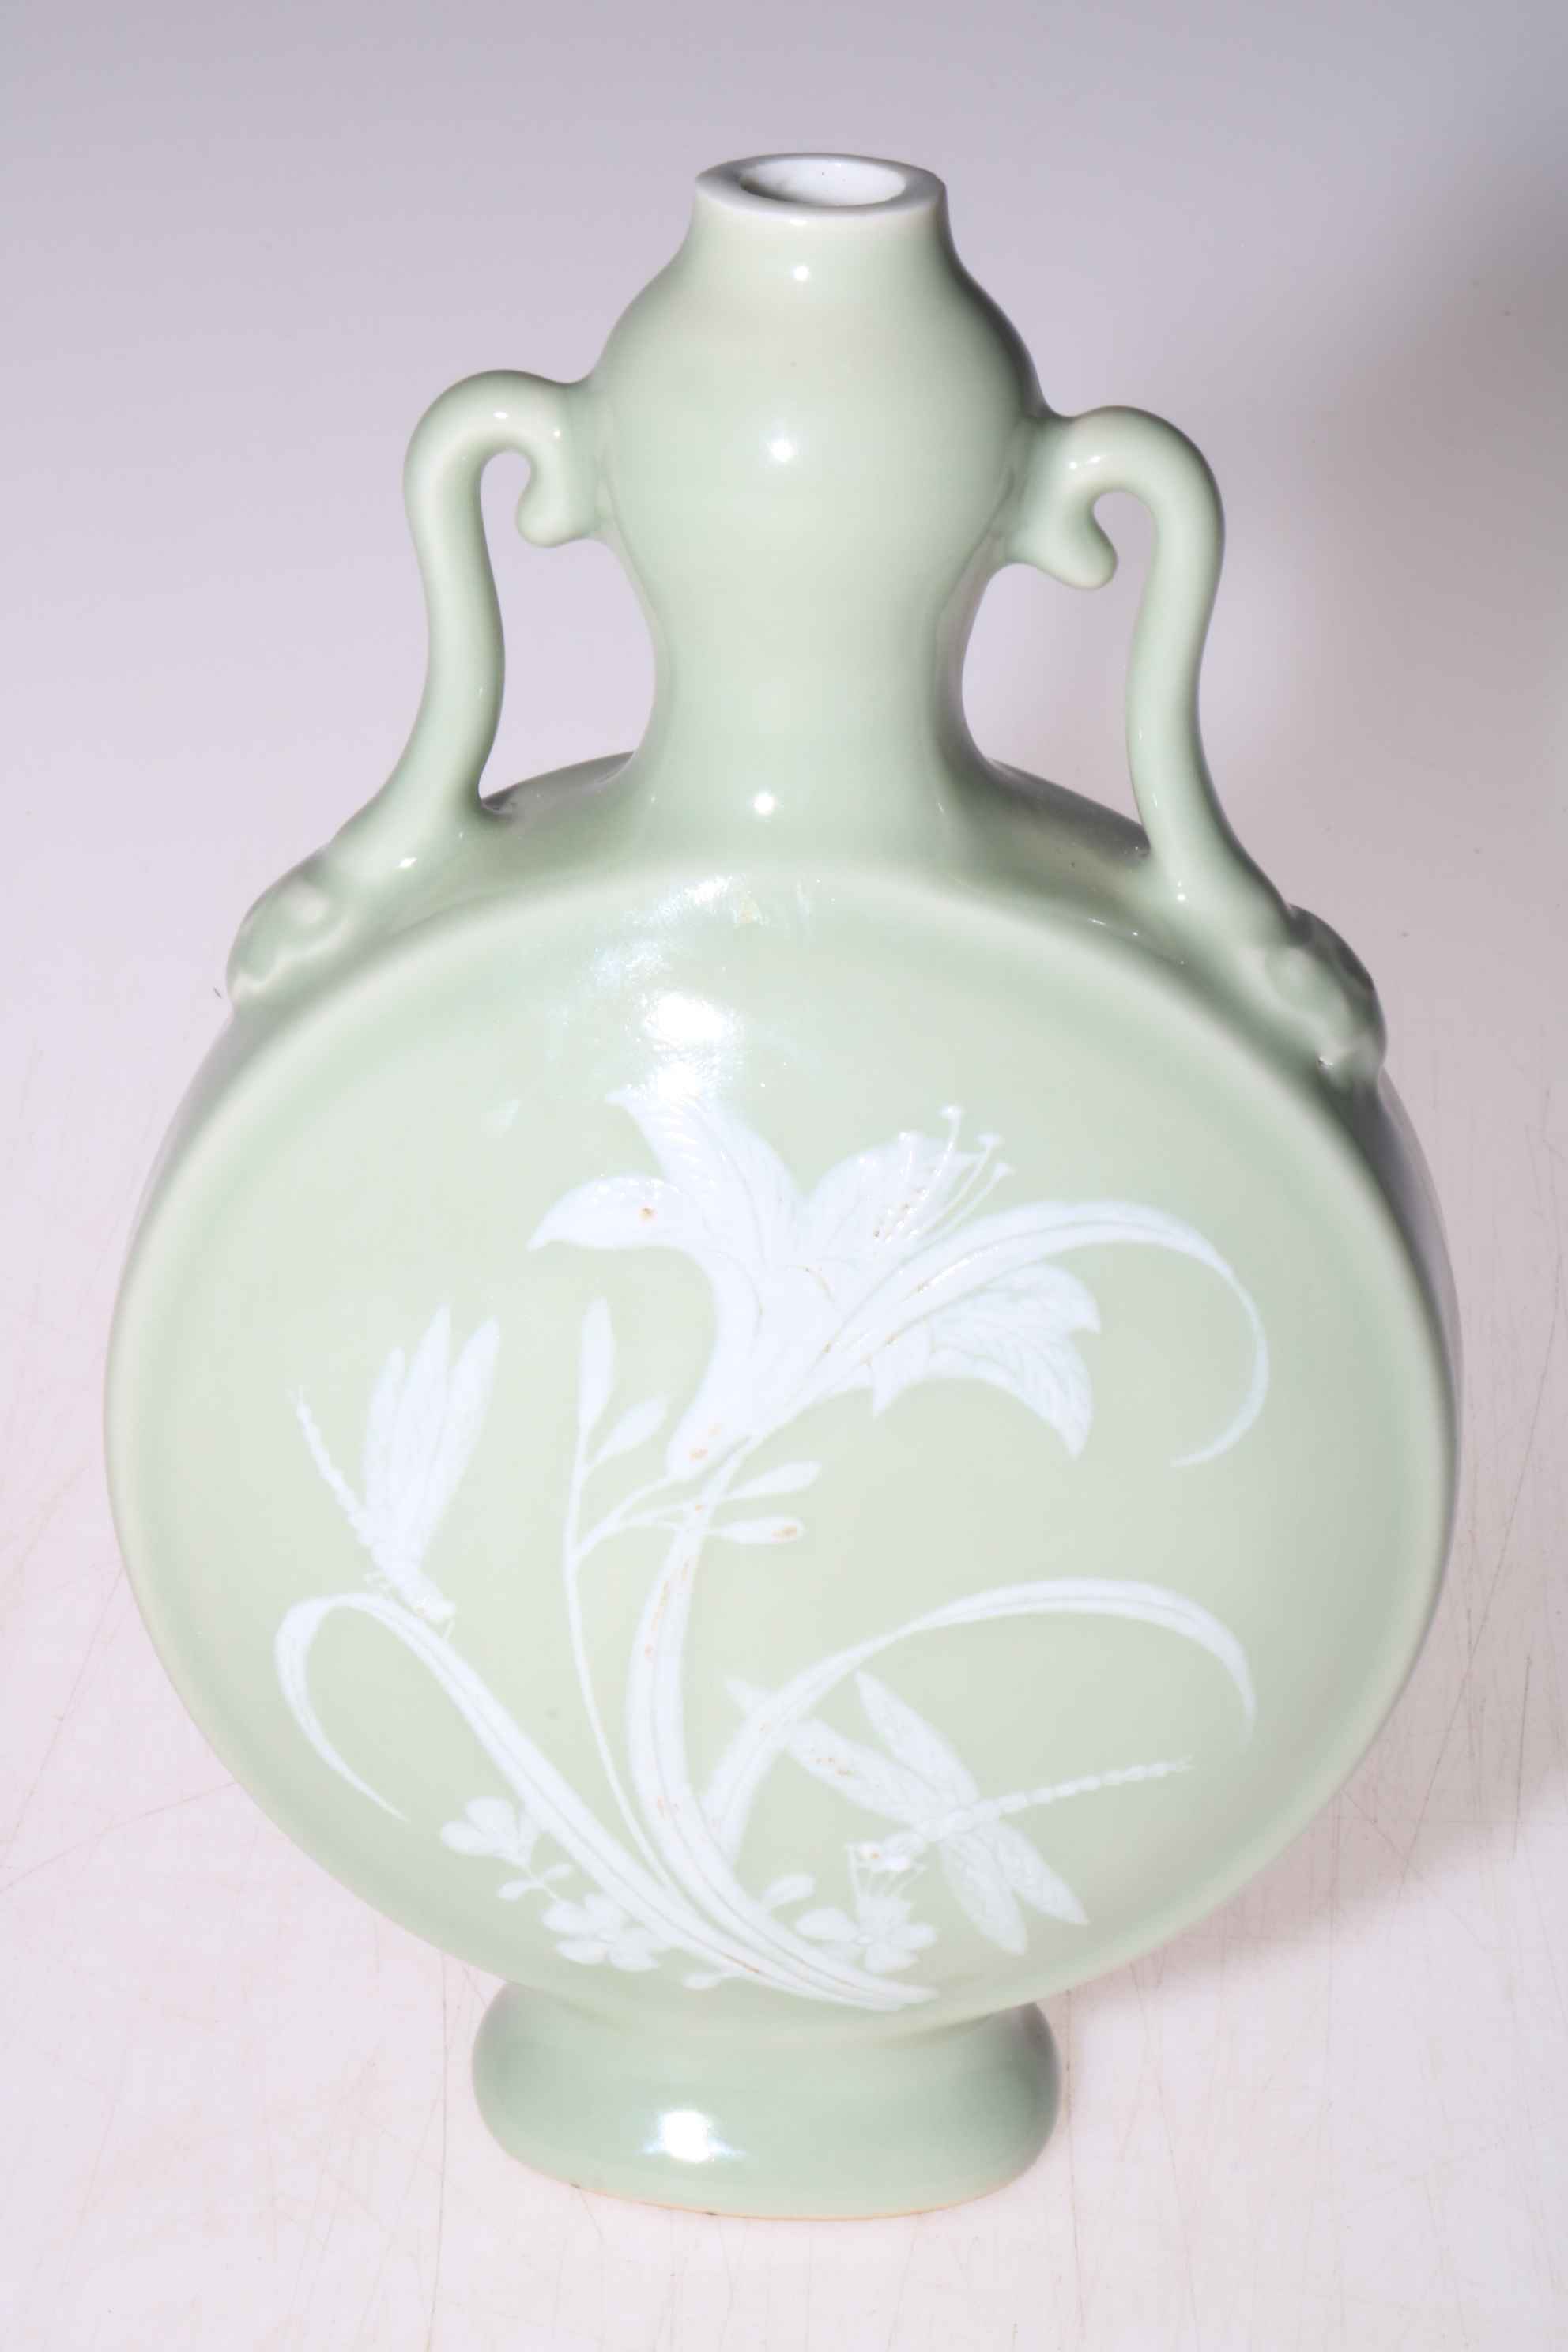 Chinese moon flask twin handled vase with floral pattern on pale ground, 21cm high. - Image 2 of 3